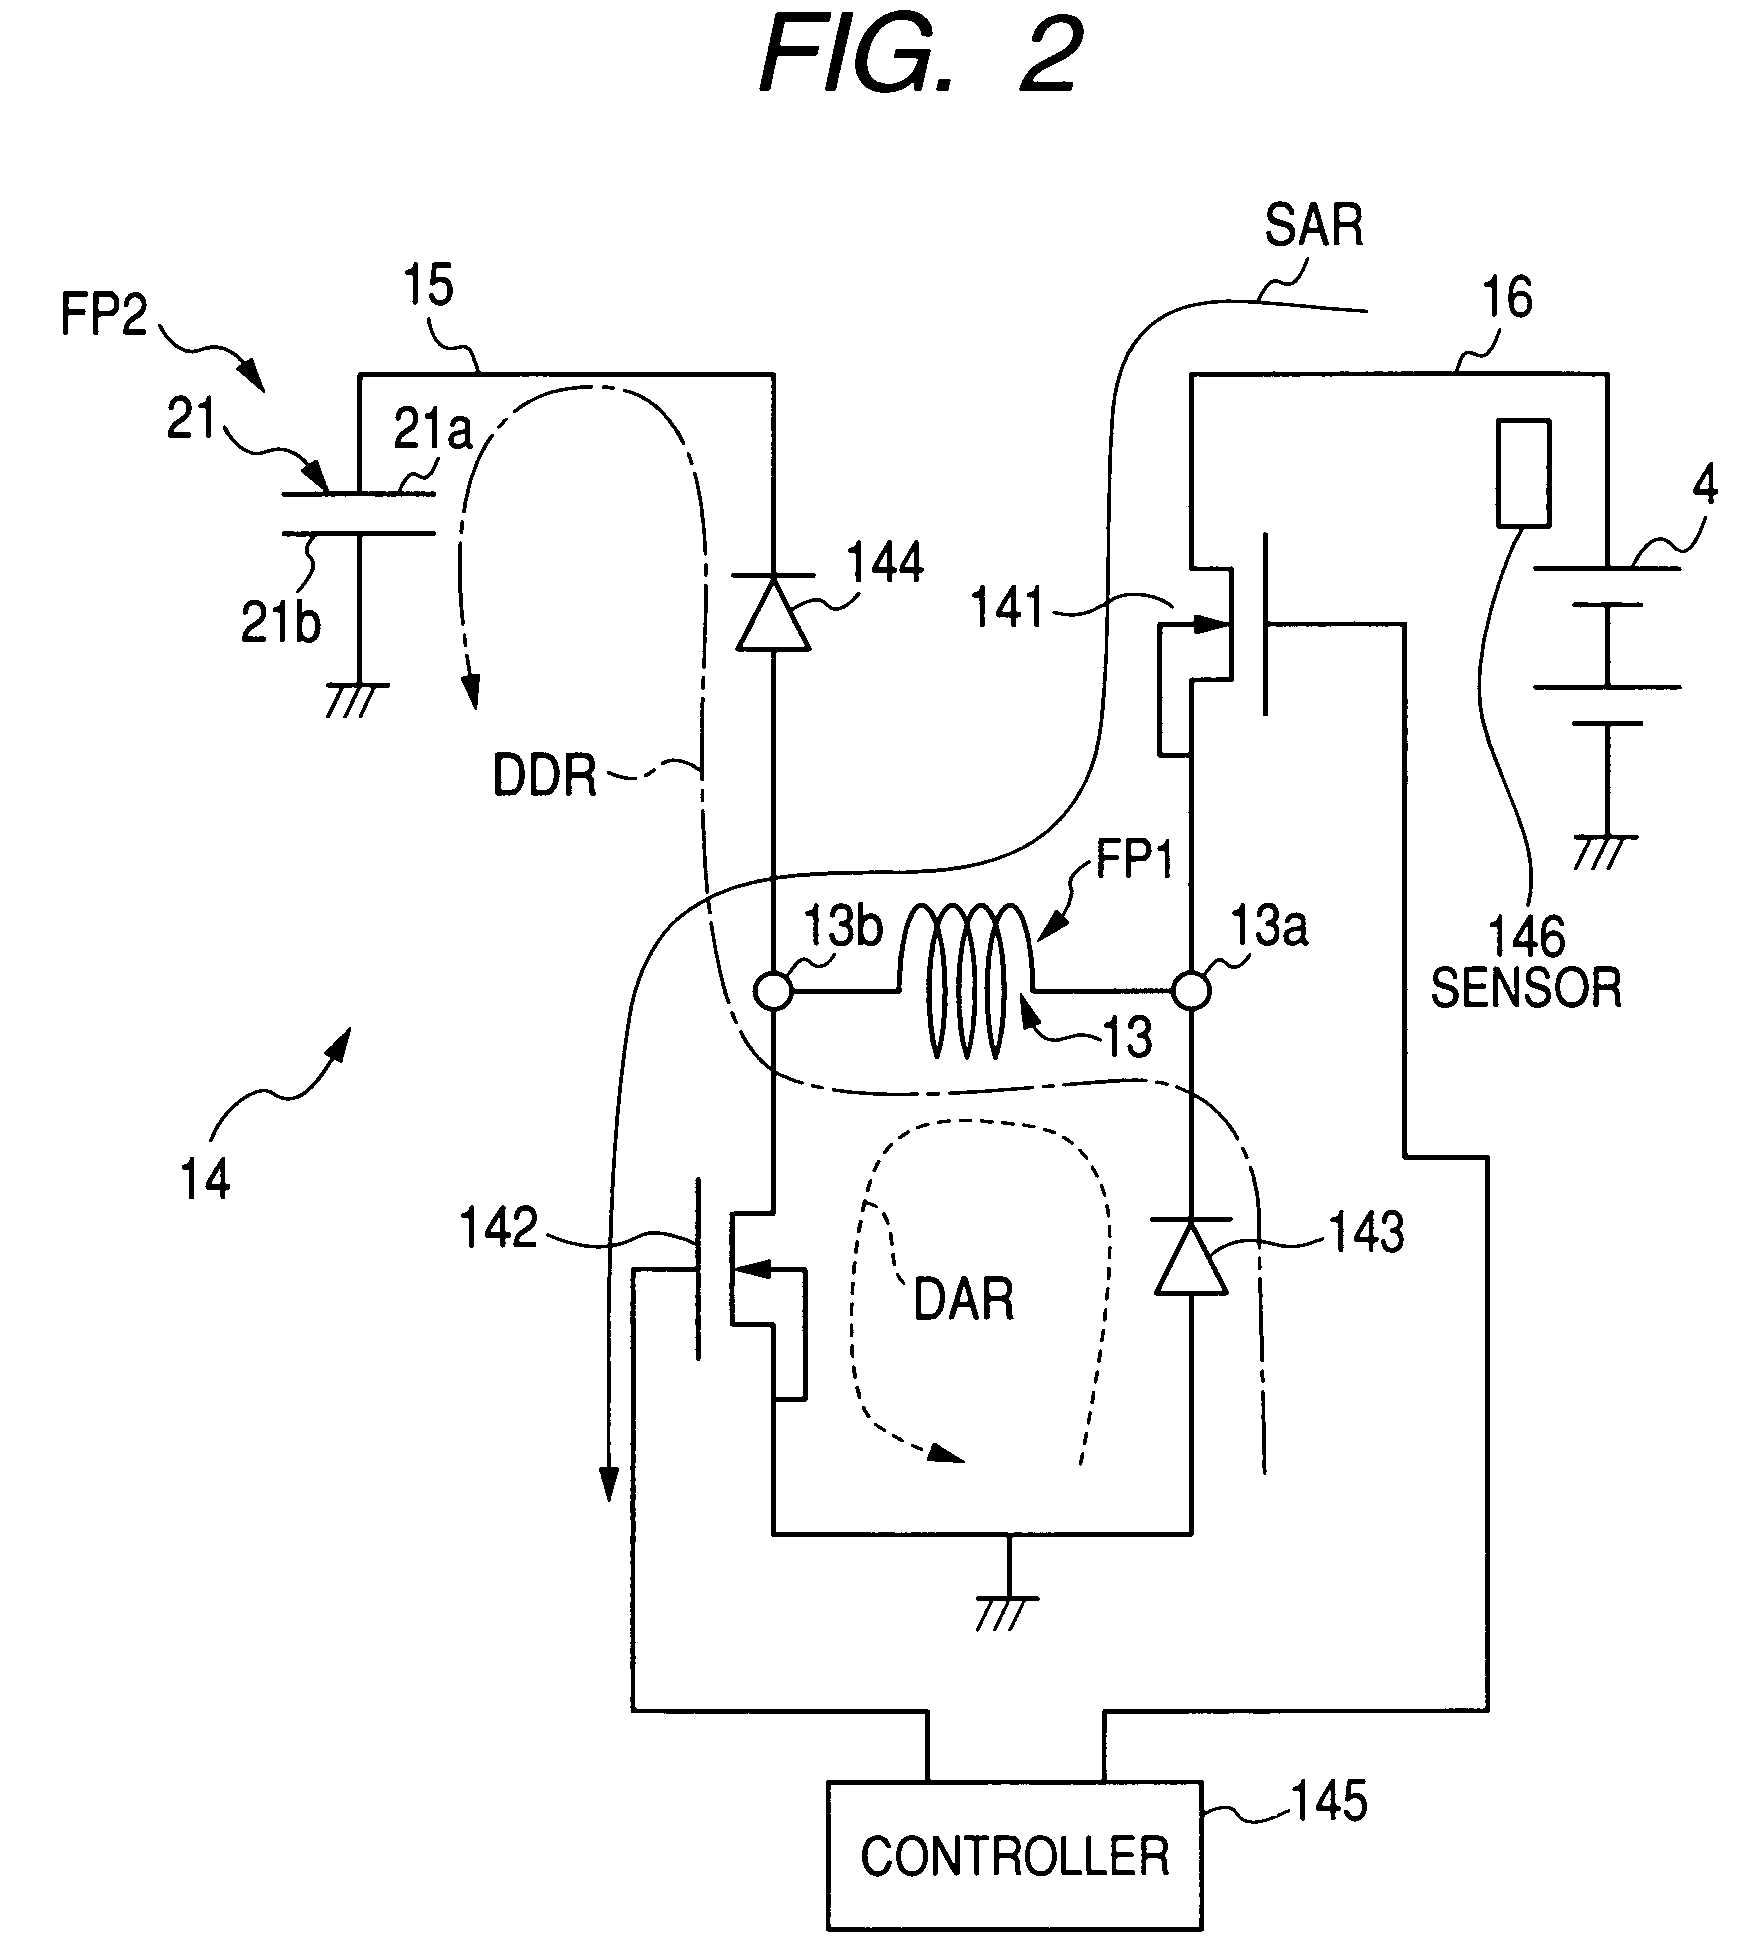 Power-generator control apparatus for addressing occurrence of voltage transient